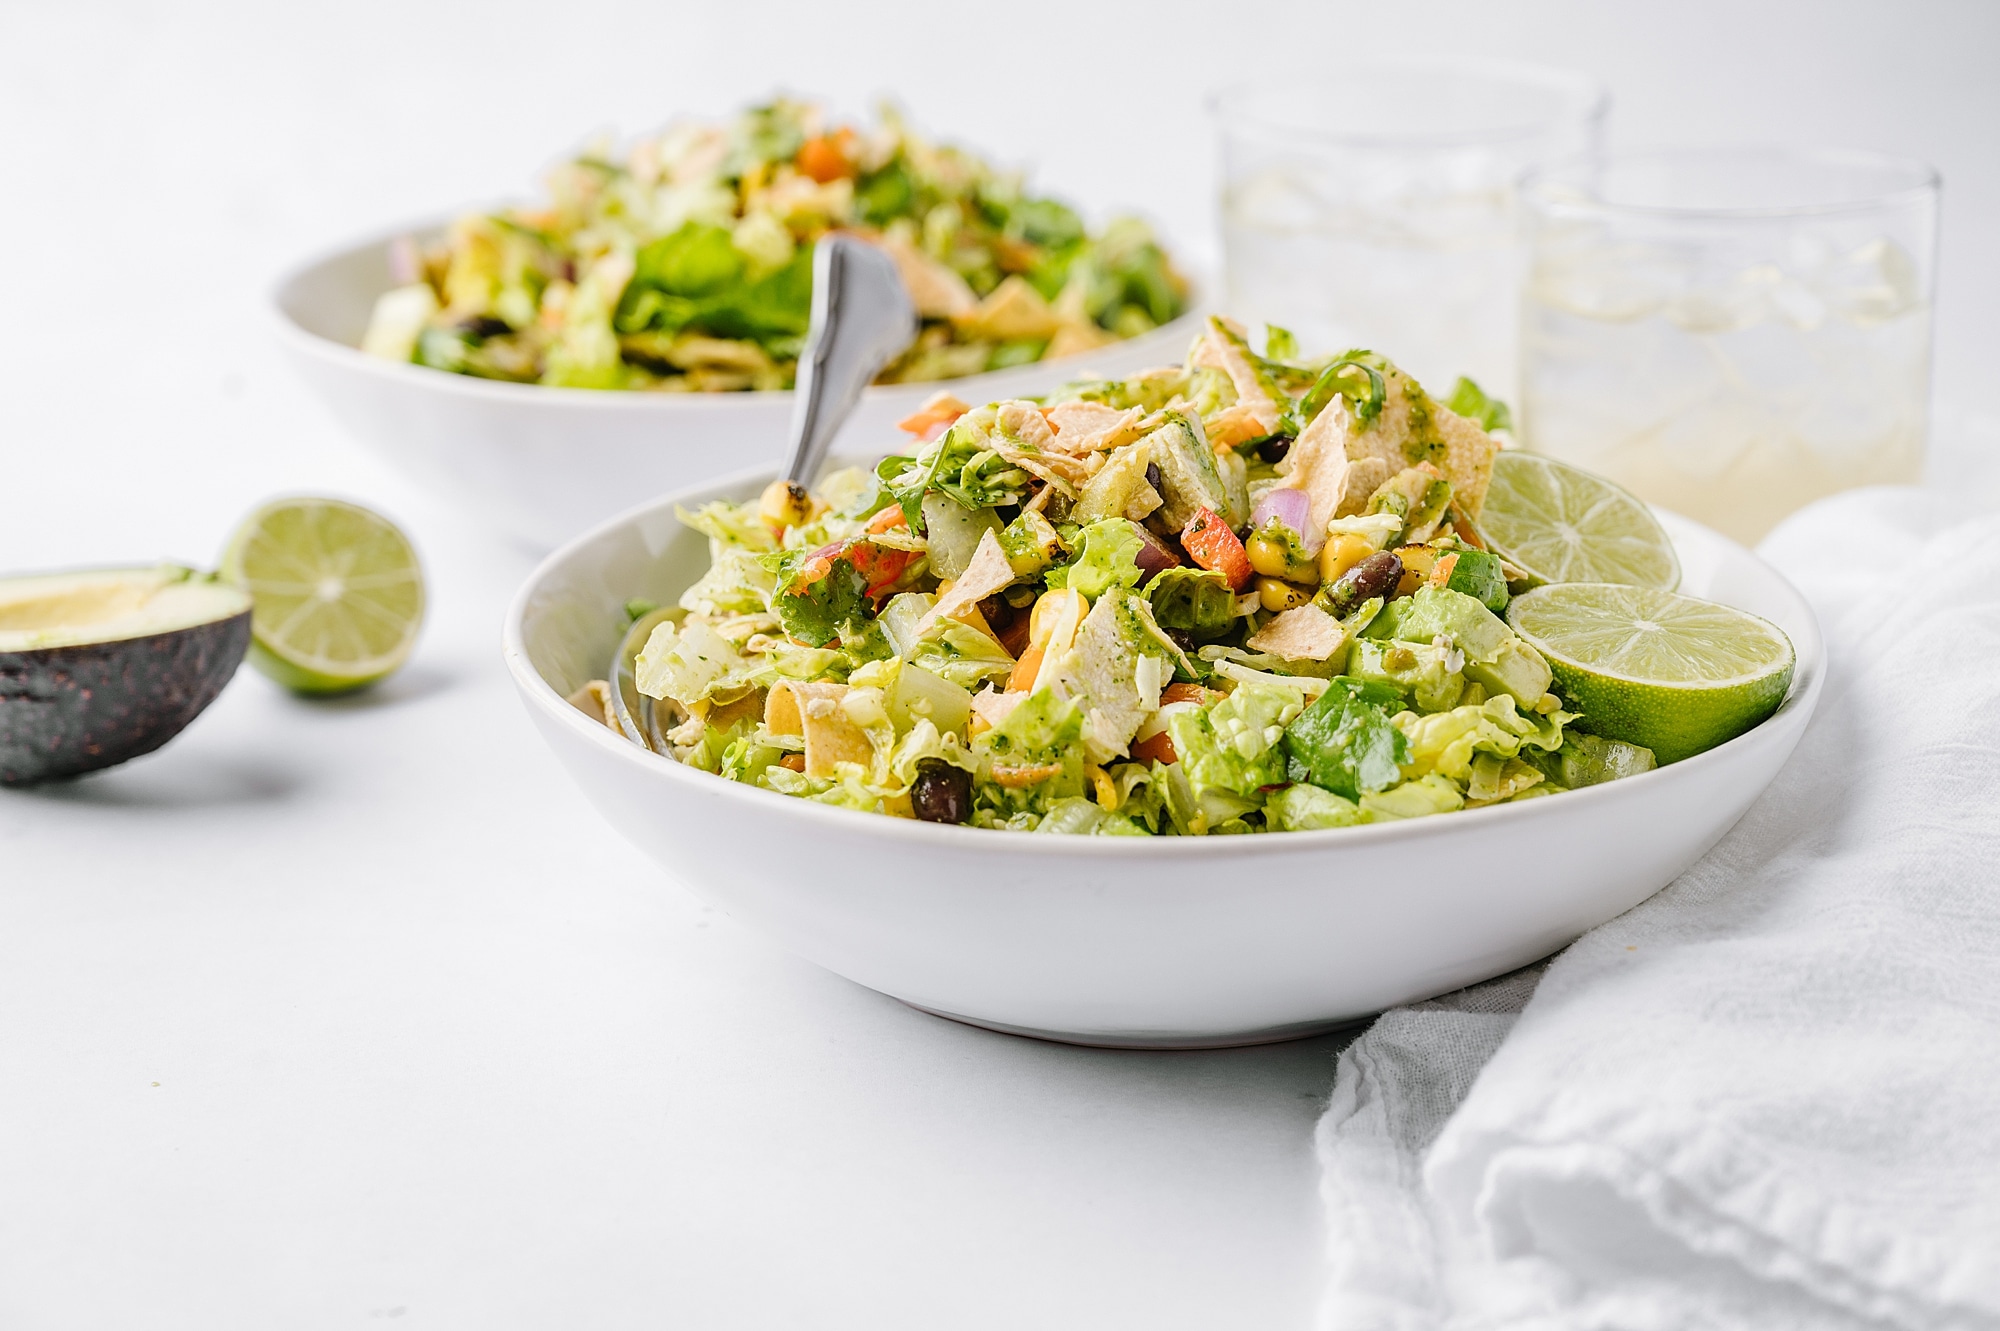 bowls of Mexican Chicken Salad with Honey Cilantro Dressing